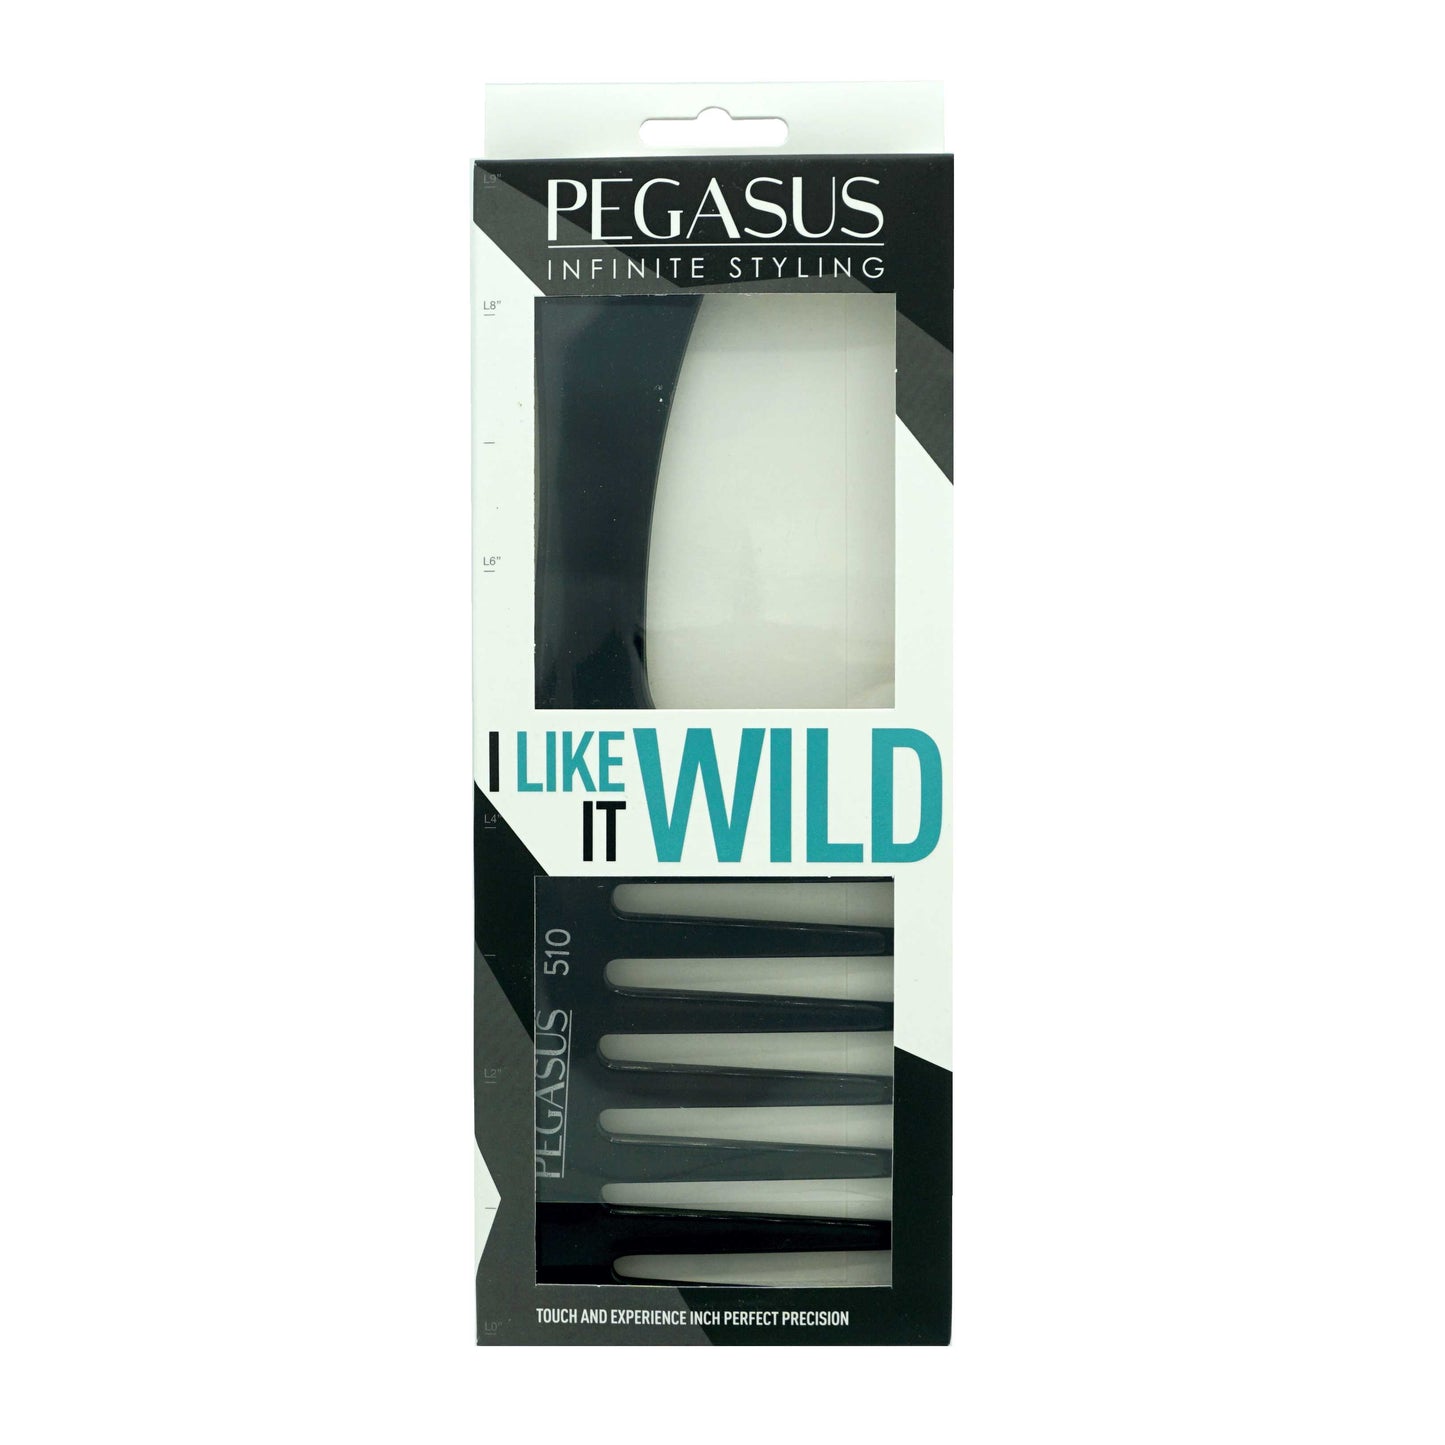 Pegasus 510, 9in Hard Rubber Large Detangling Handled Styling Rake Comb, Seamless, Smooth Edges, Anti Static, Heat and Chemically Resistant, Everyday Grooming Comb | Peines de goma dura - Black